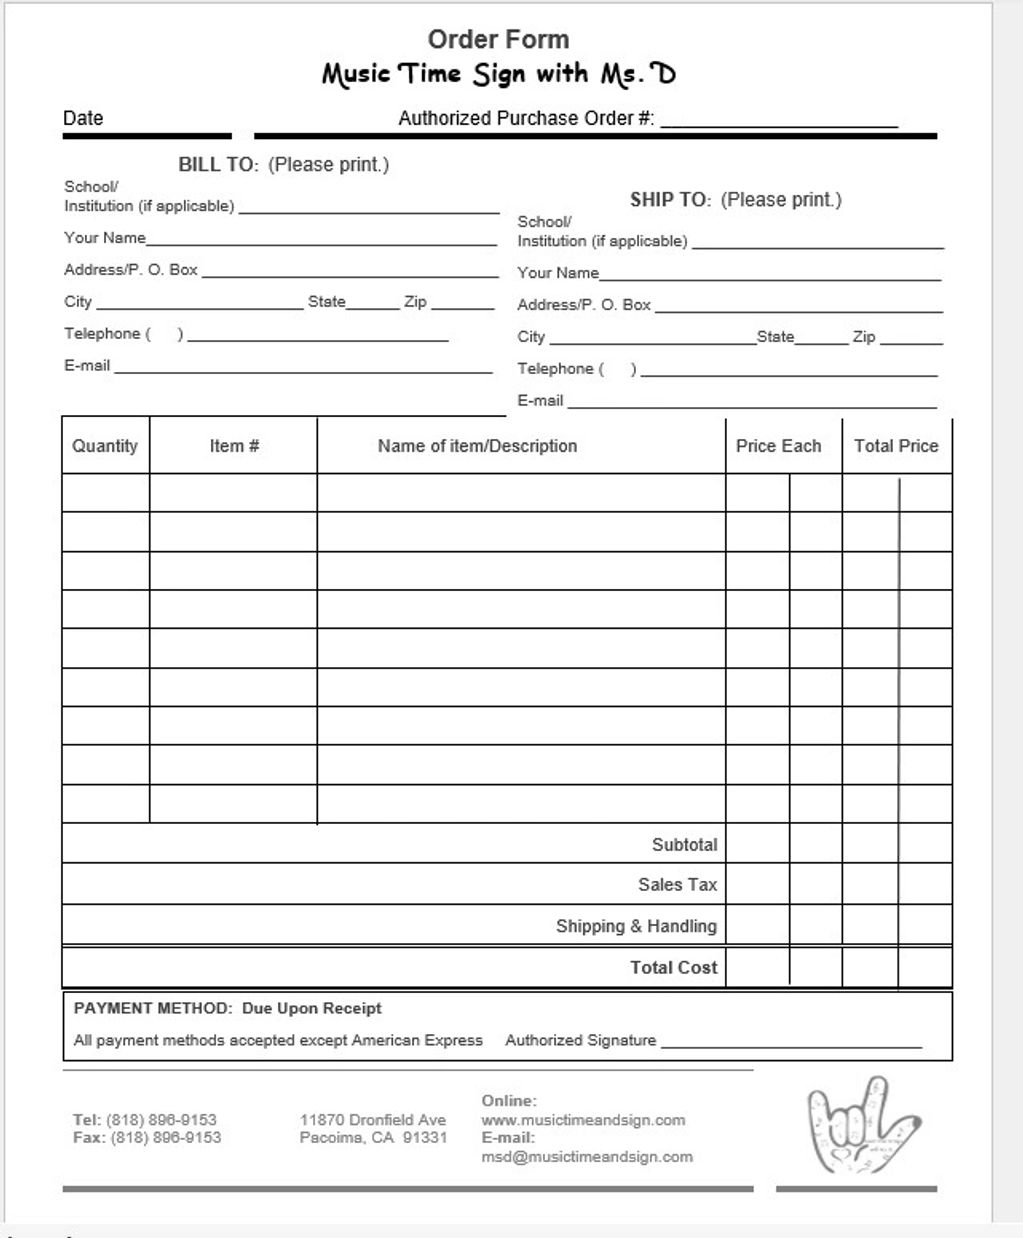 Purchase Order Form